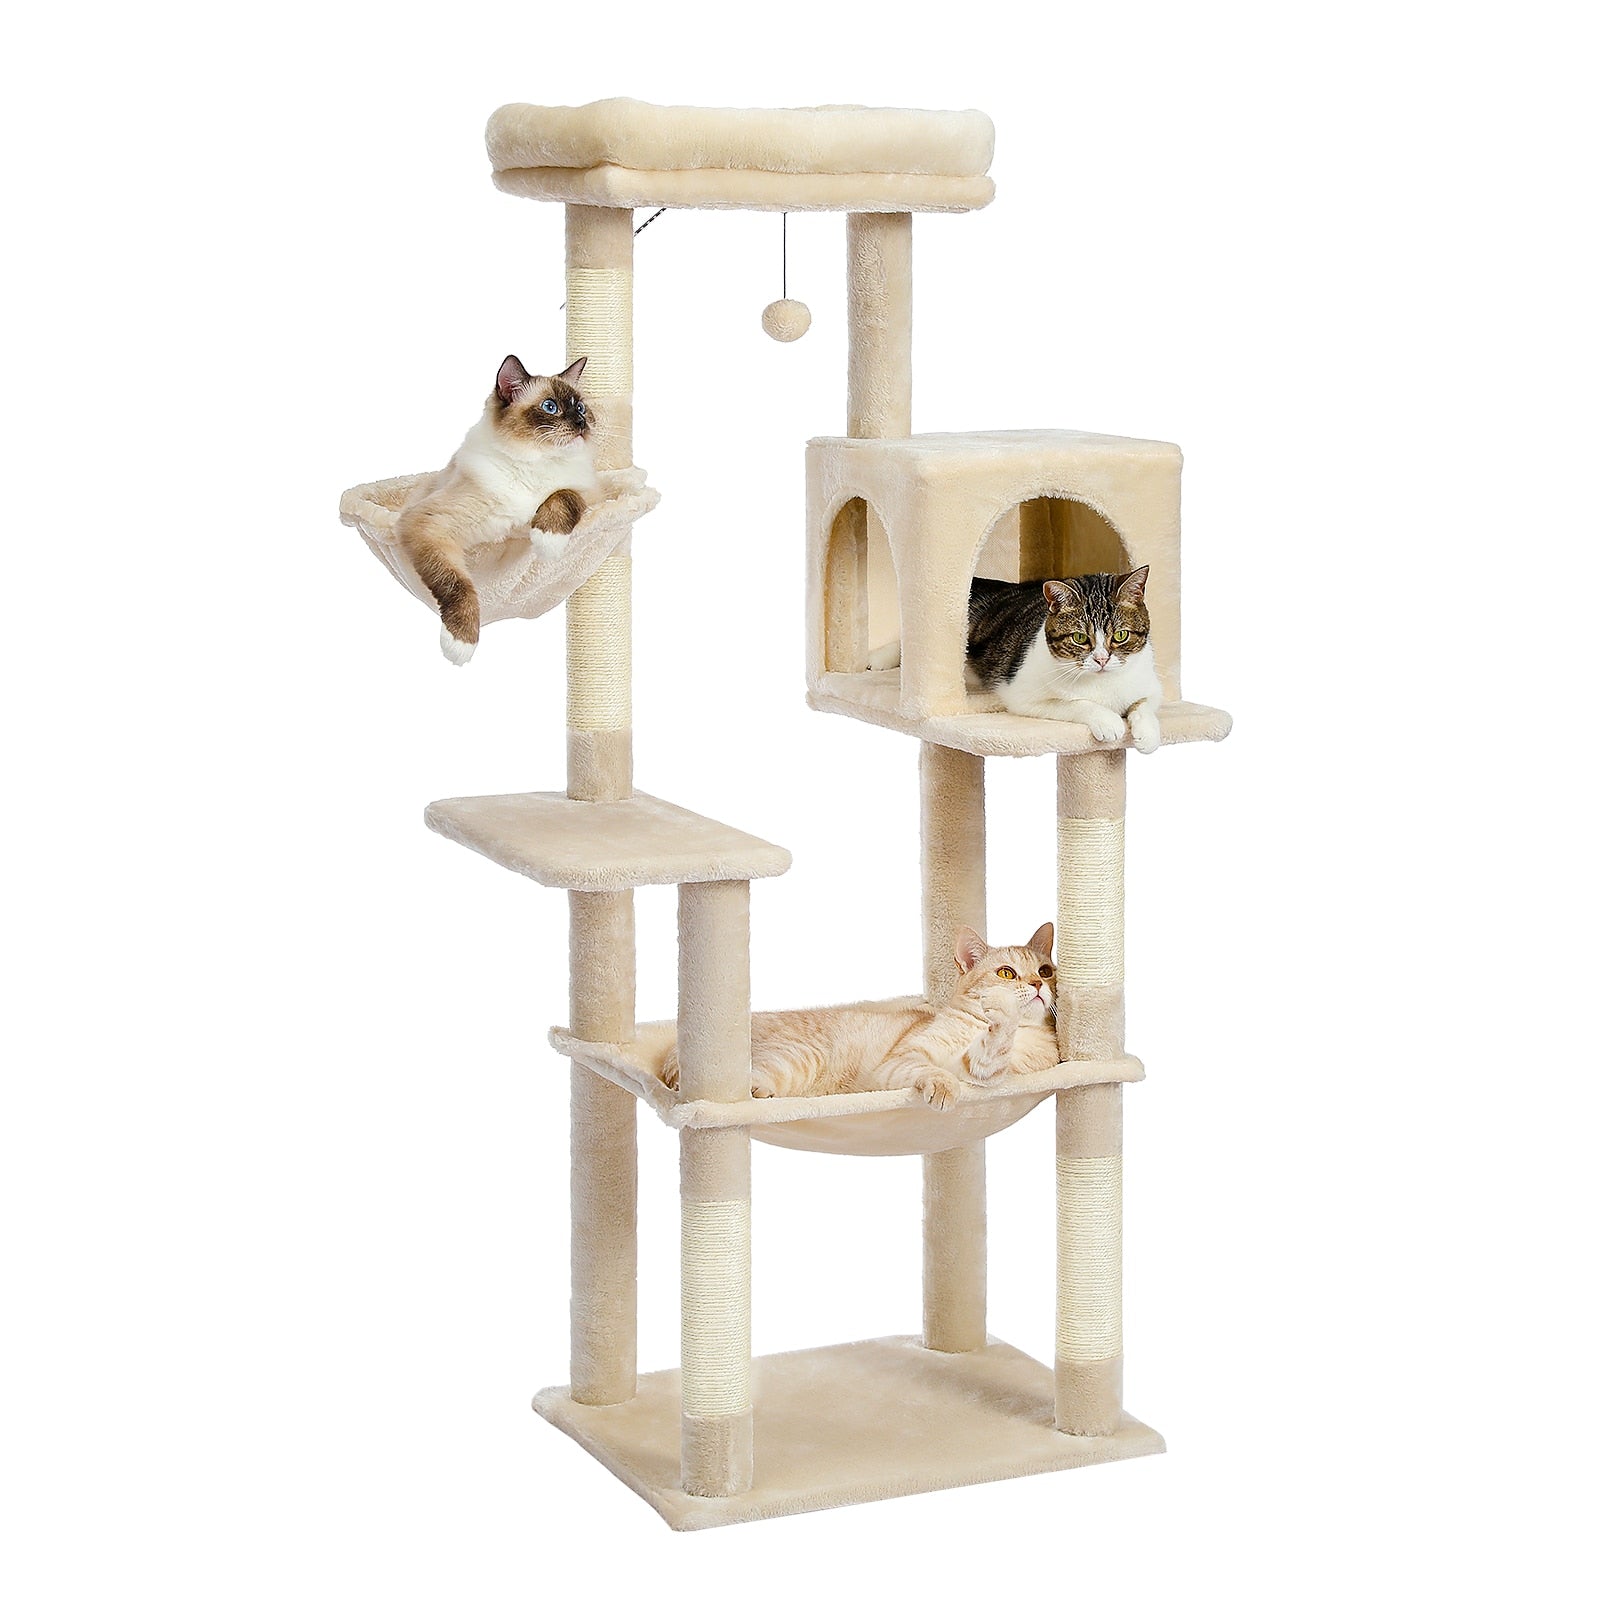 Cat Climbing Tree Toy with Ladder with Wood Scratching Post - YourCatNeeds